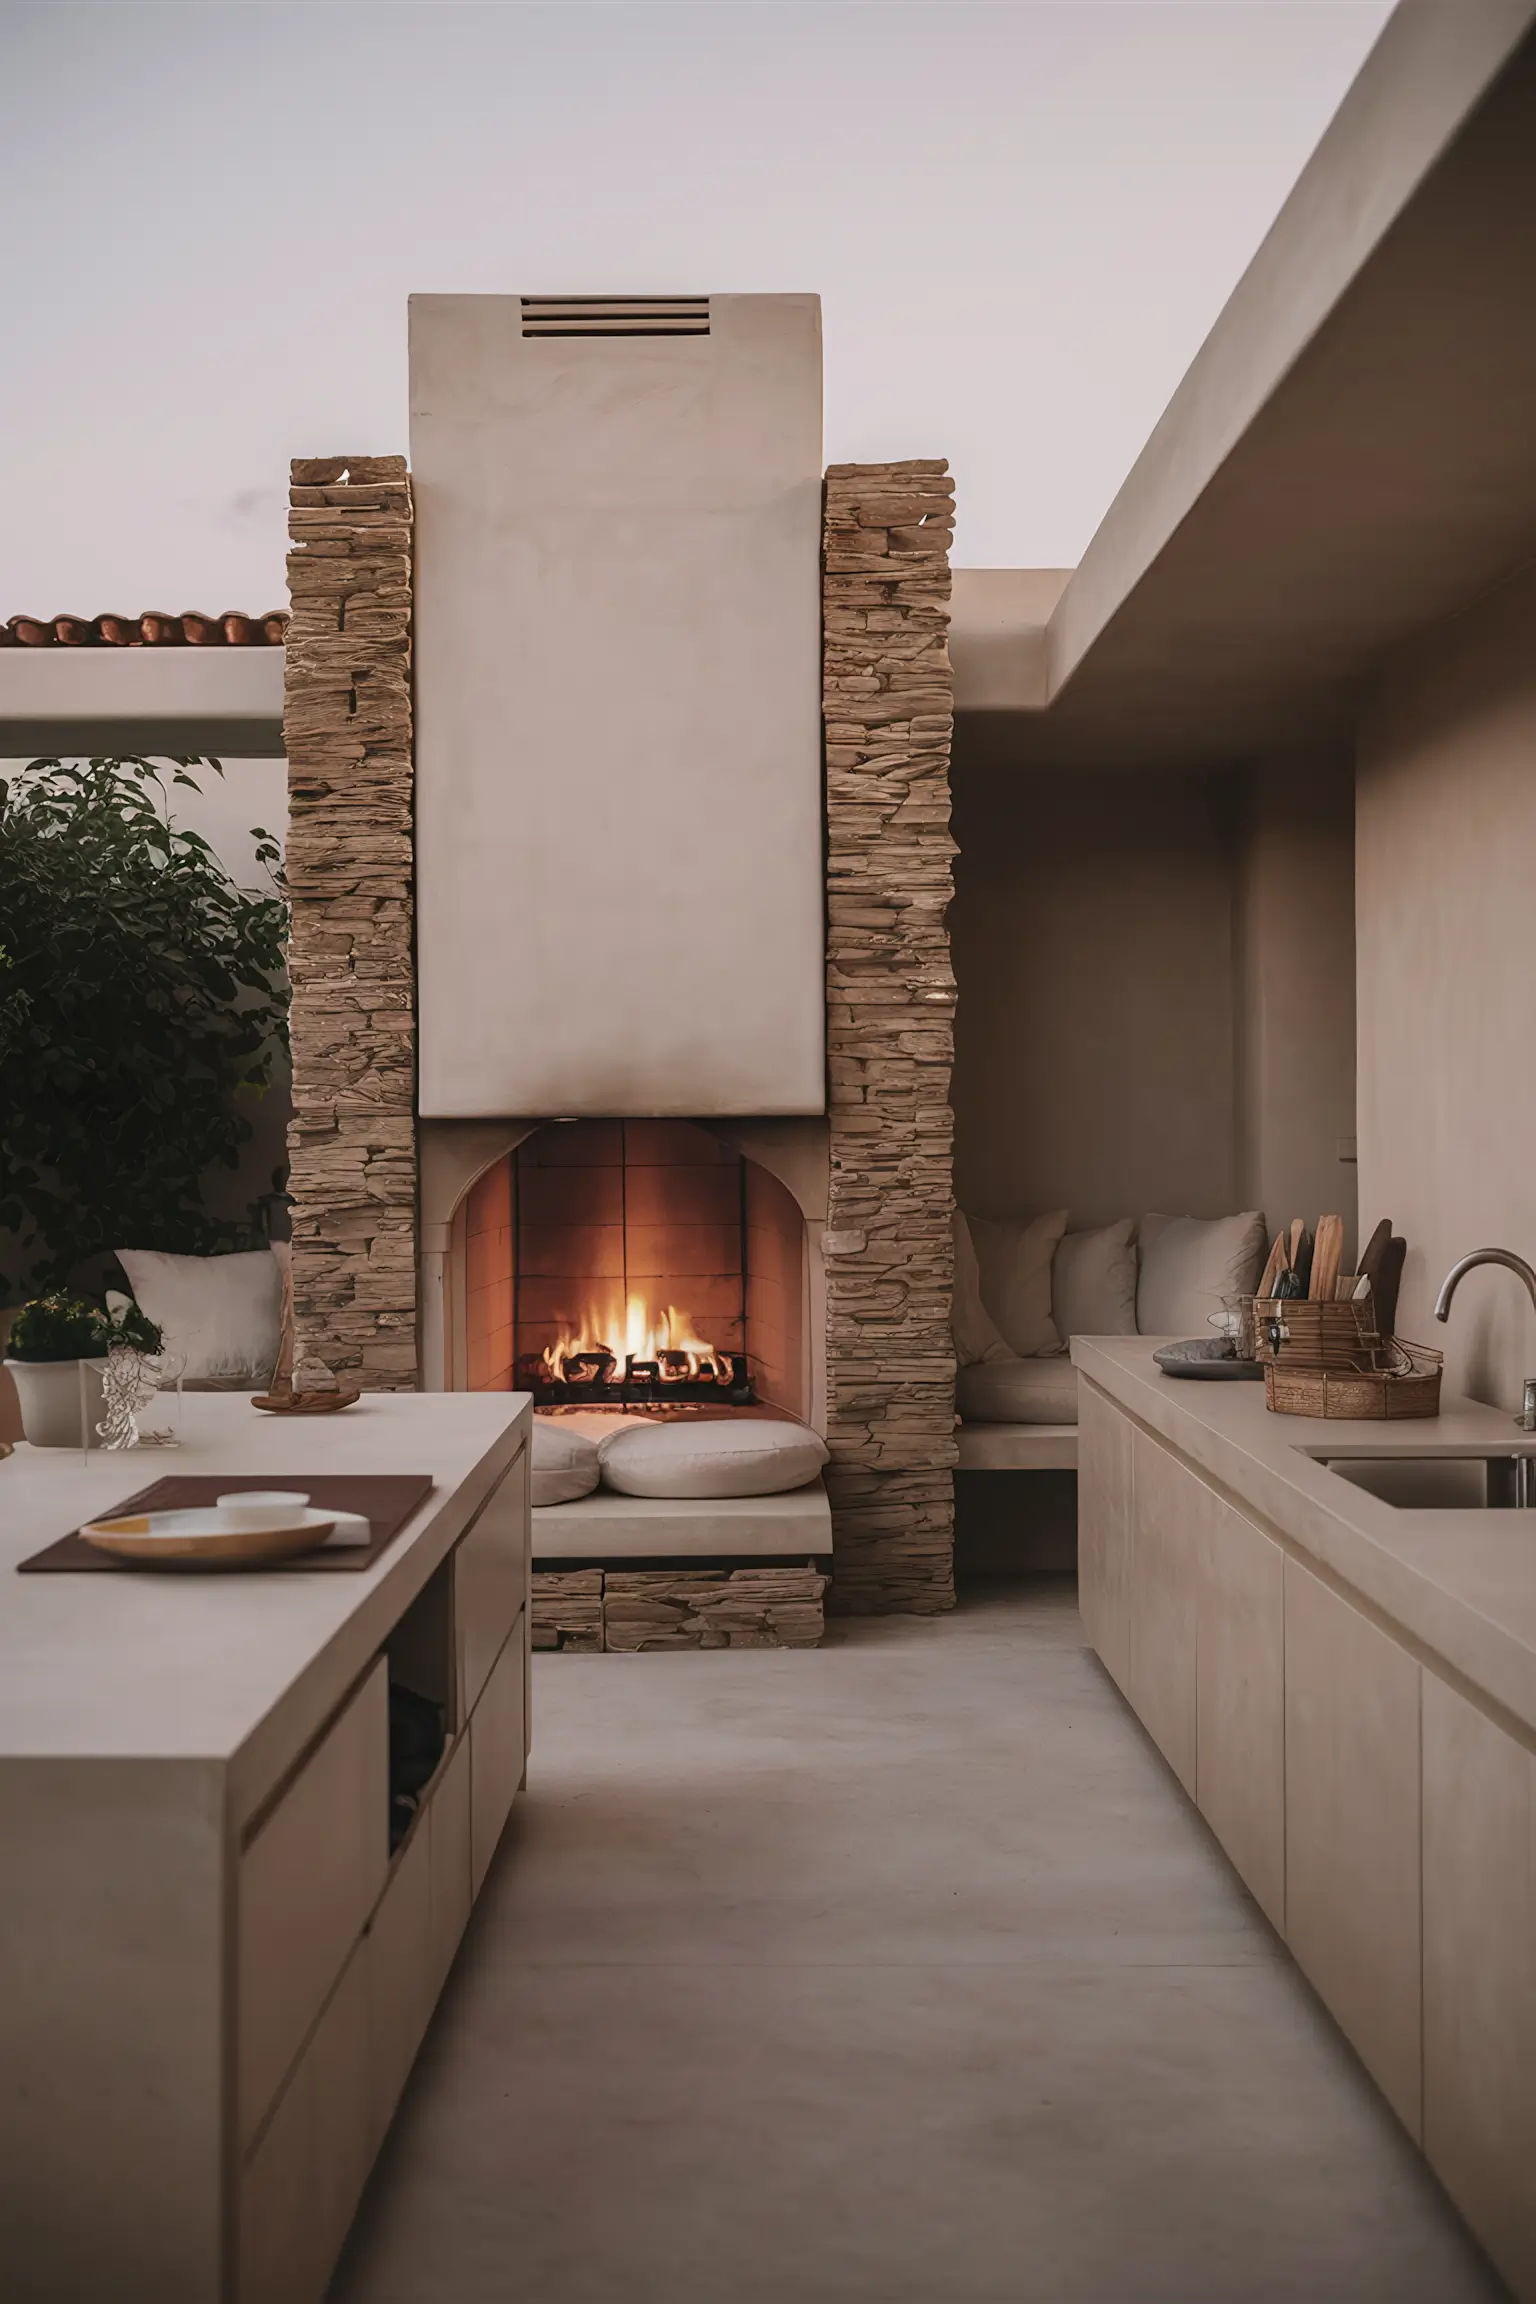 Backyard kitchen with cozy fireplace and seating area.